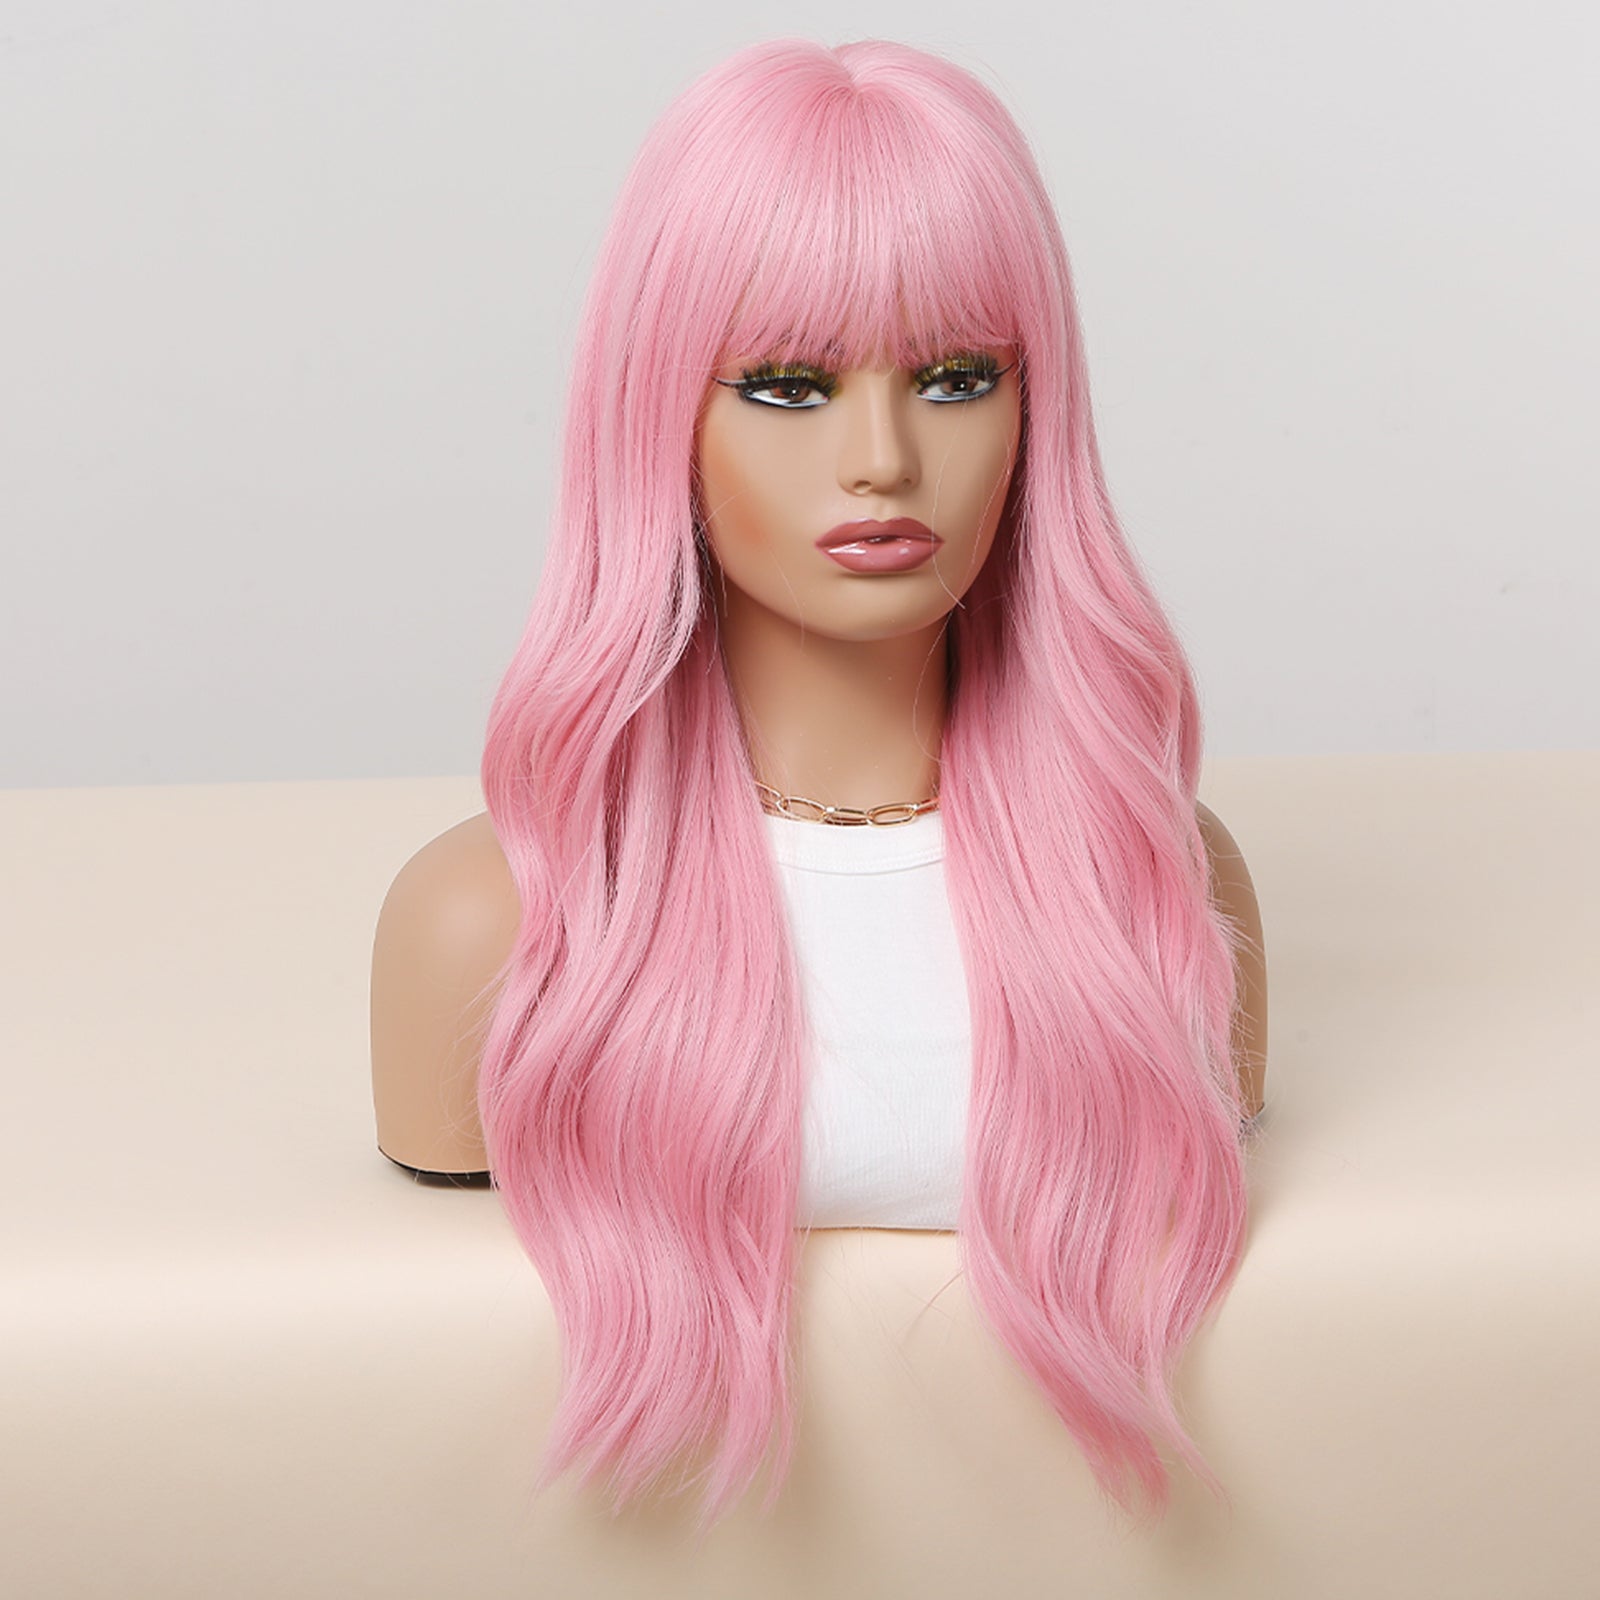 24 Inch Long Pink Wavy Wig With Bangs Synthetic Heat Resistant Wig WL1038-1